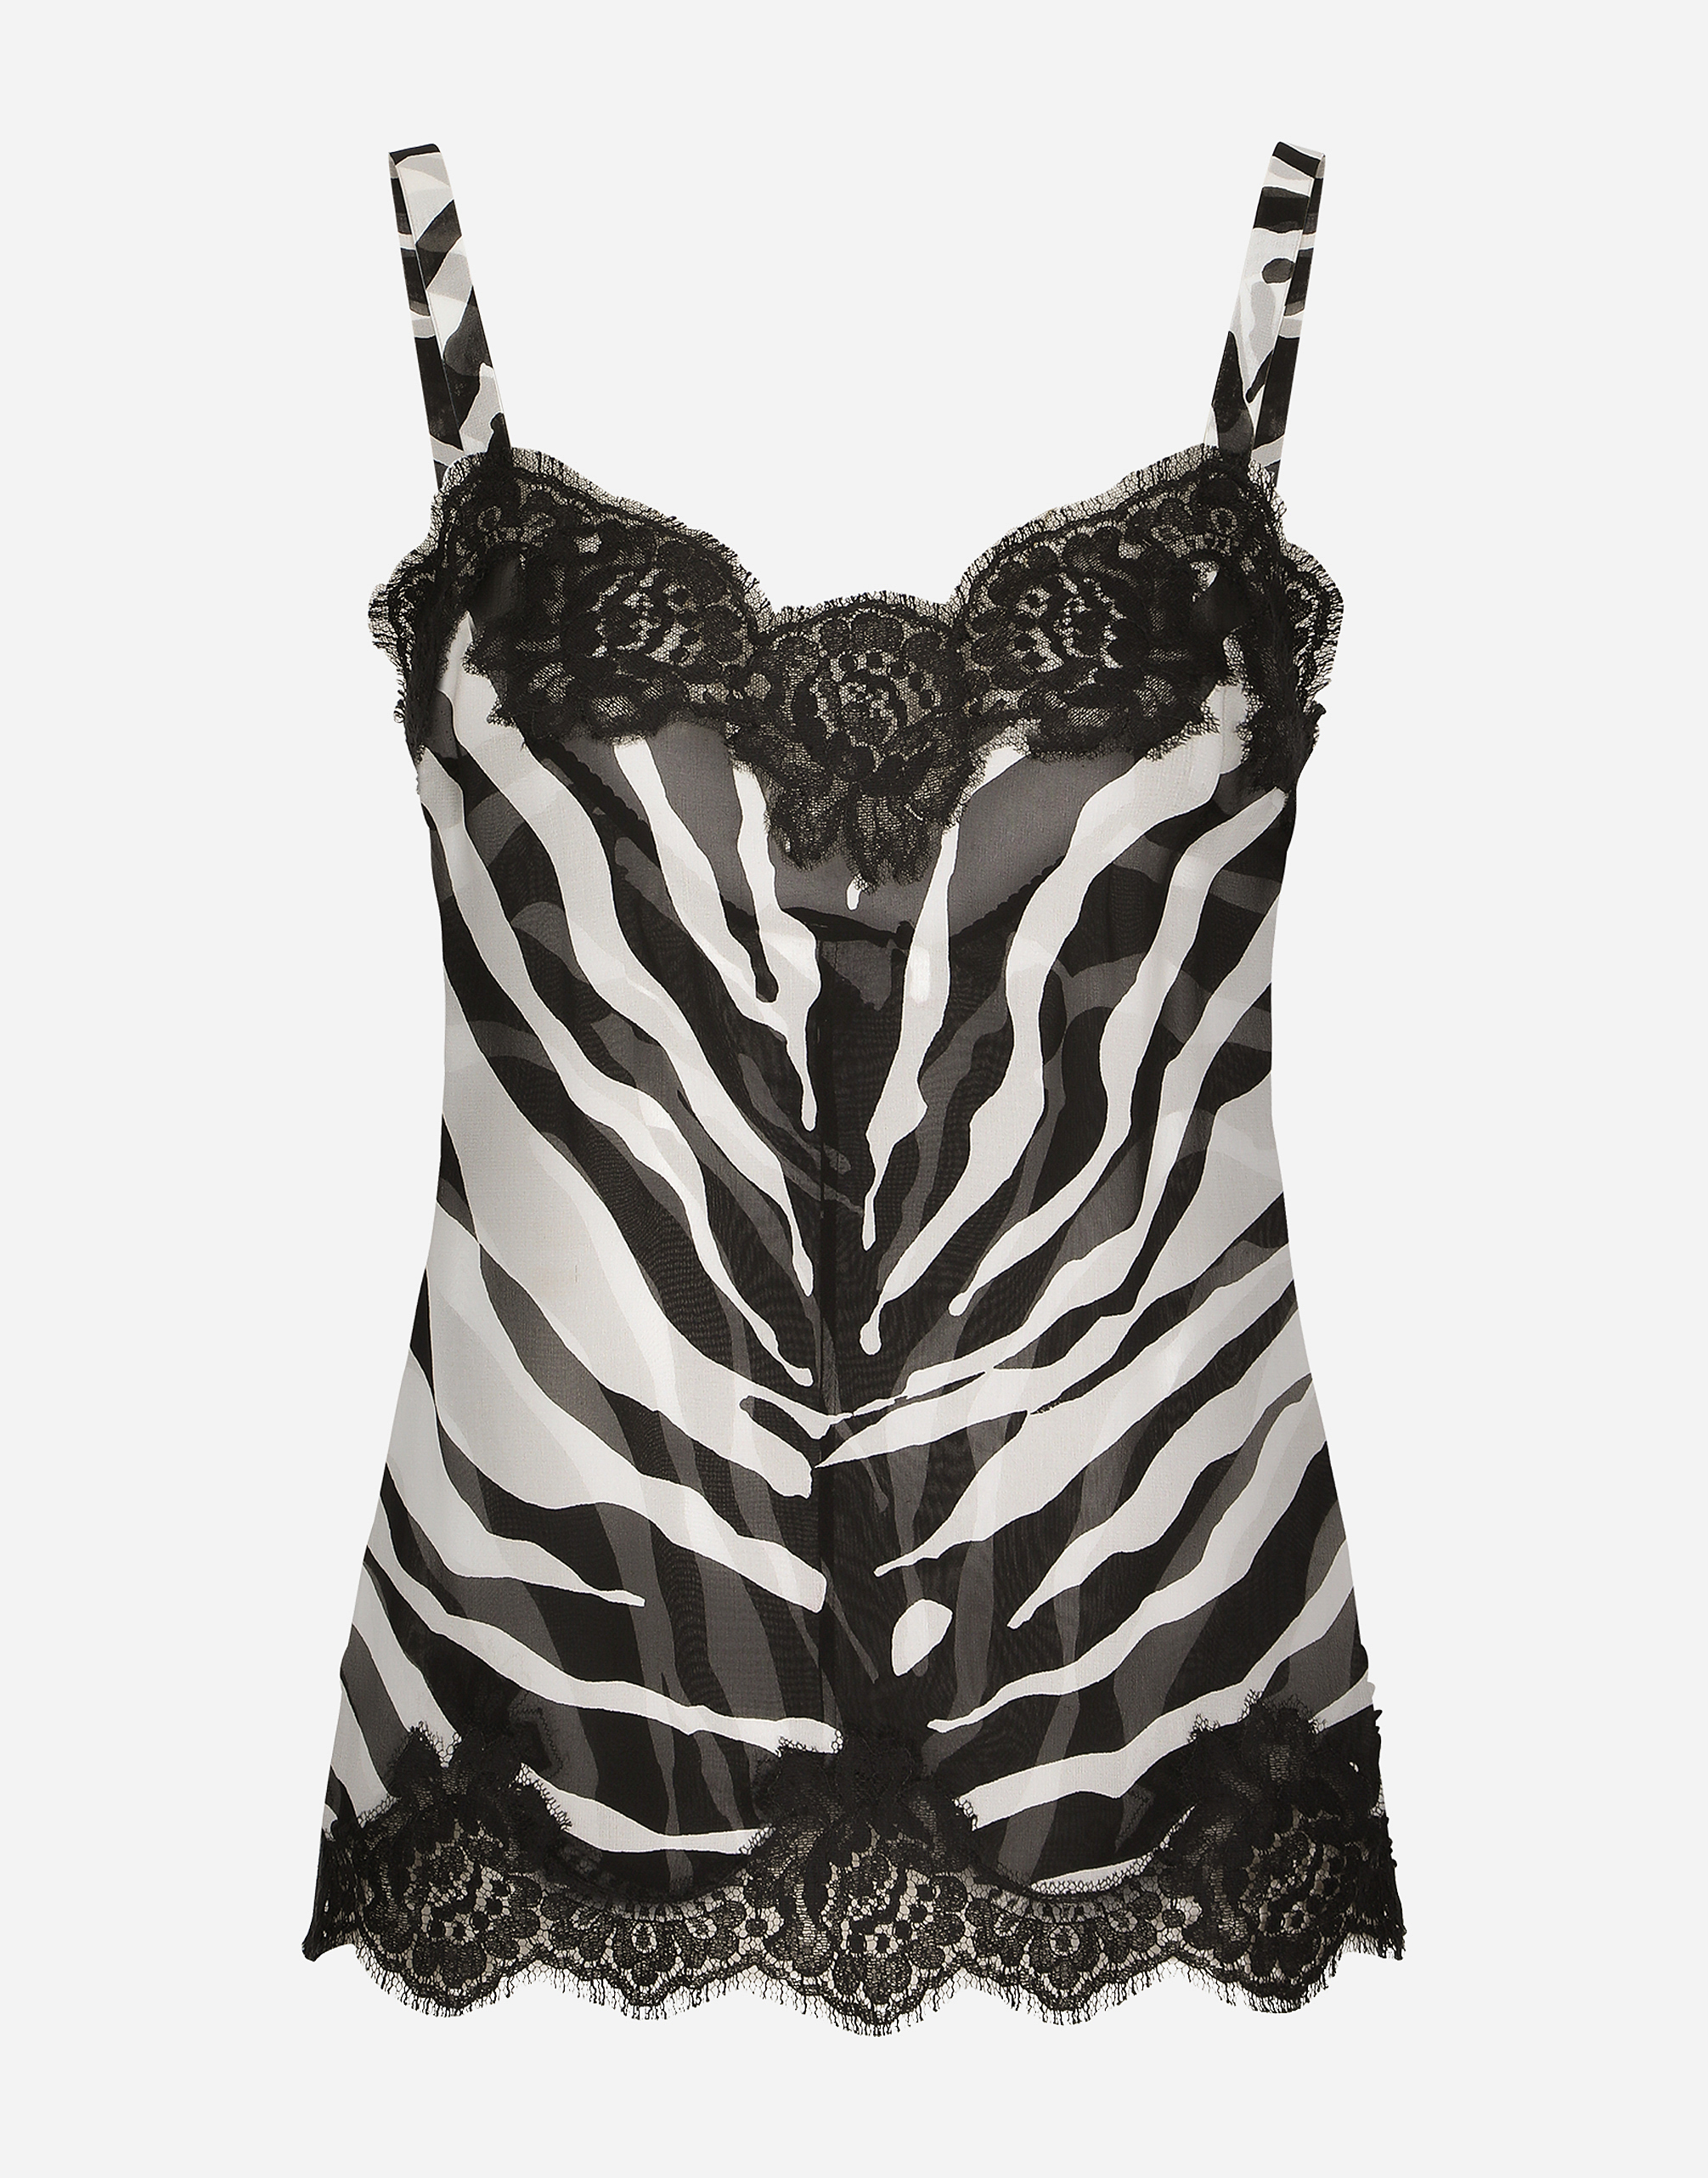 Dolce & Gabbana Zebra-print Chiffon Lingerie-style Top With Lace Detailing In Animal Print